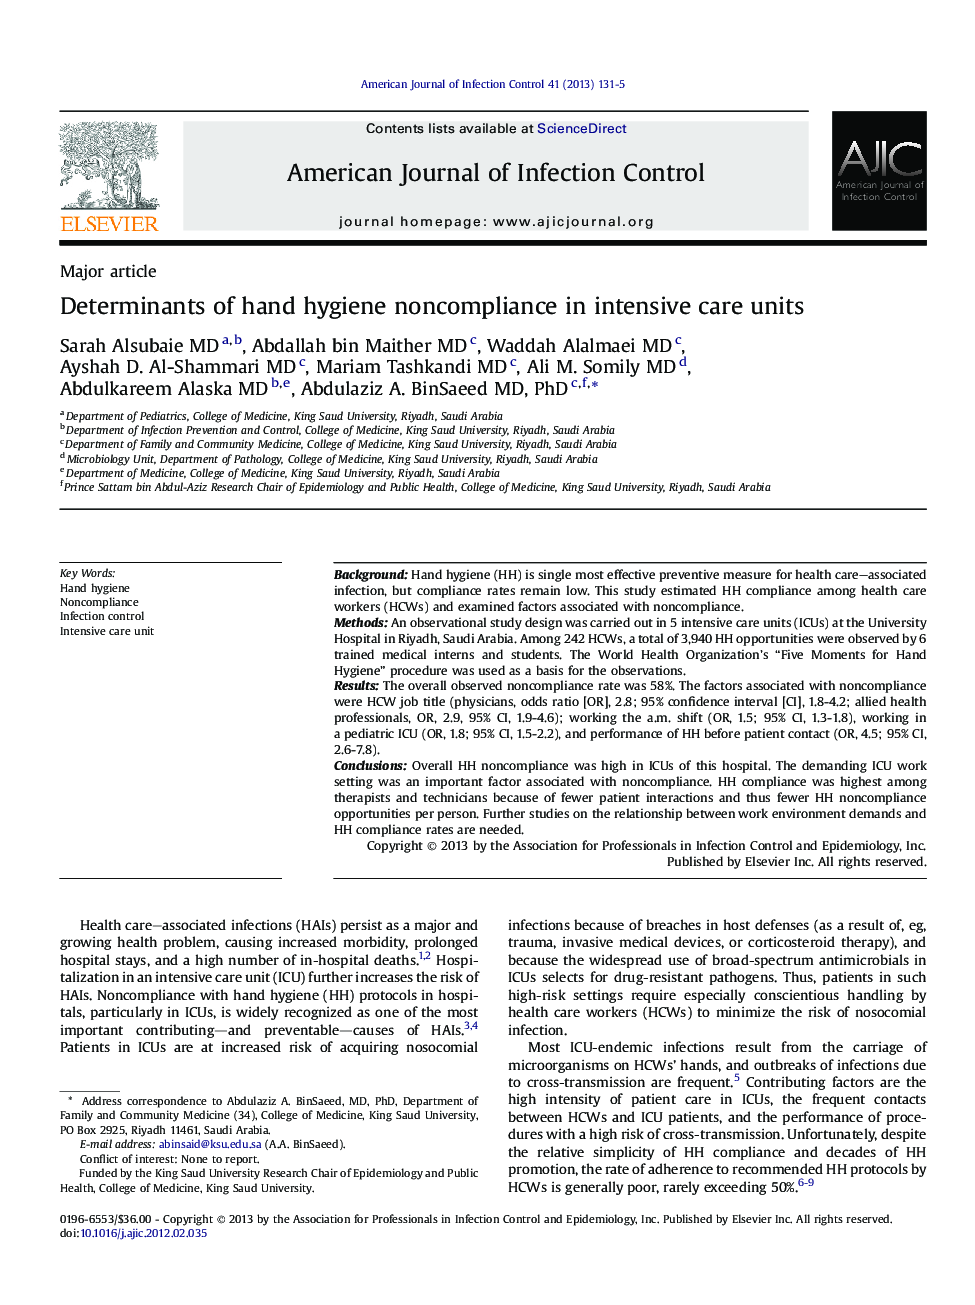 Determinants of hand hygiene noncompliance in intensive care units 